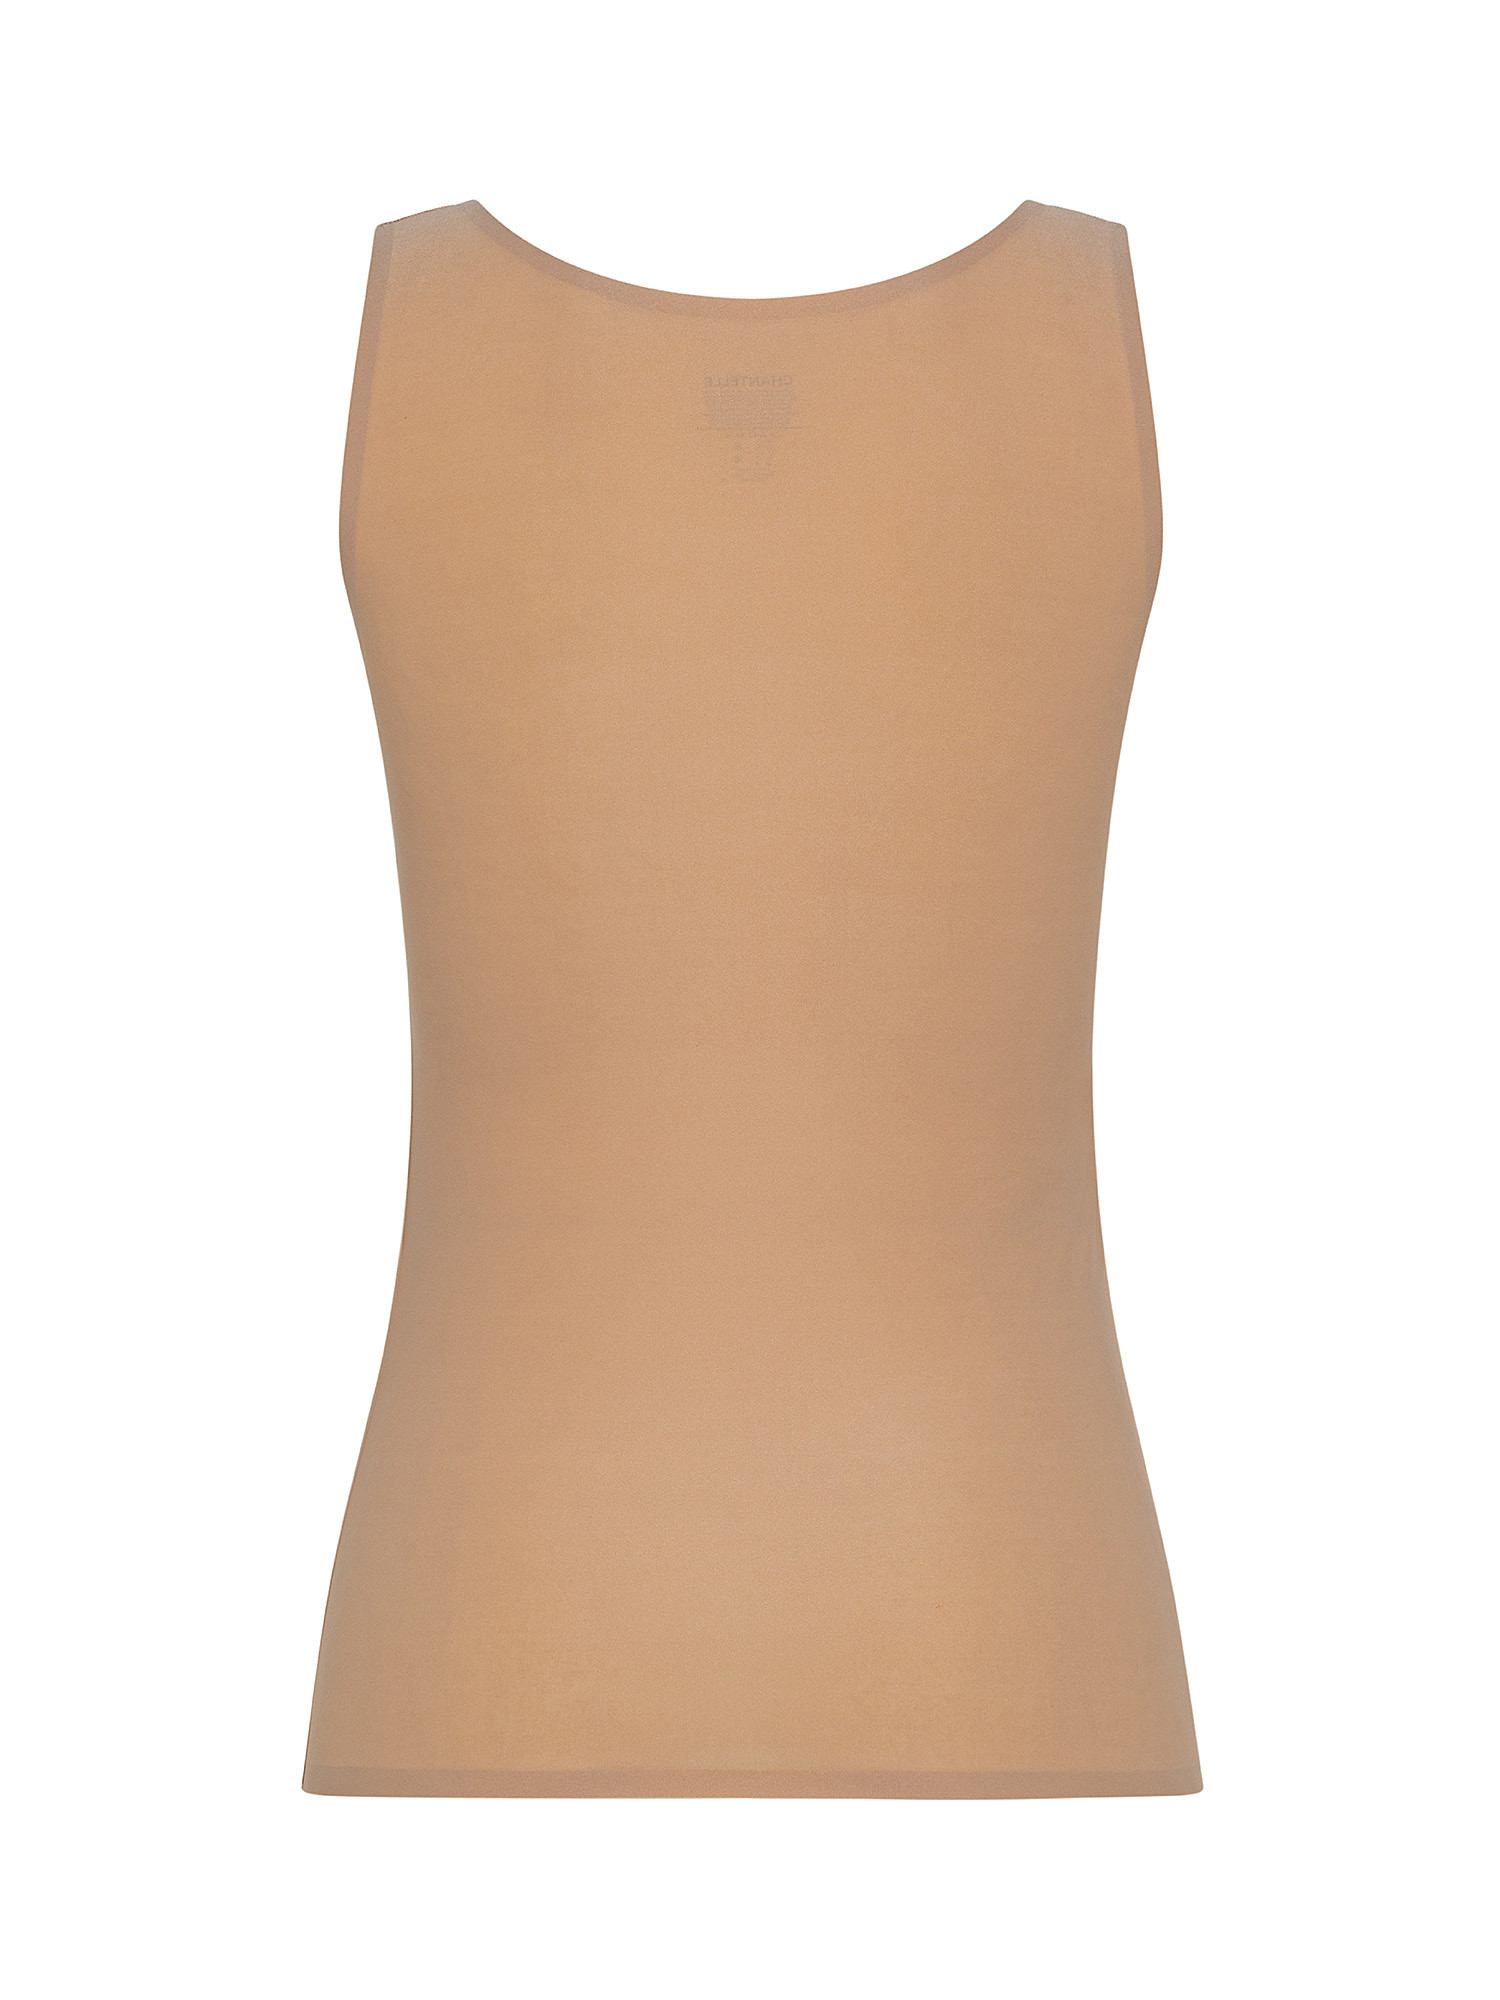 Top with round neckline, Nude, large image number 1